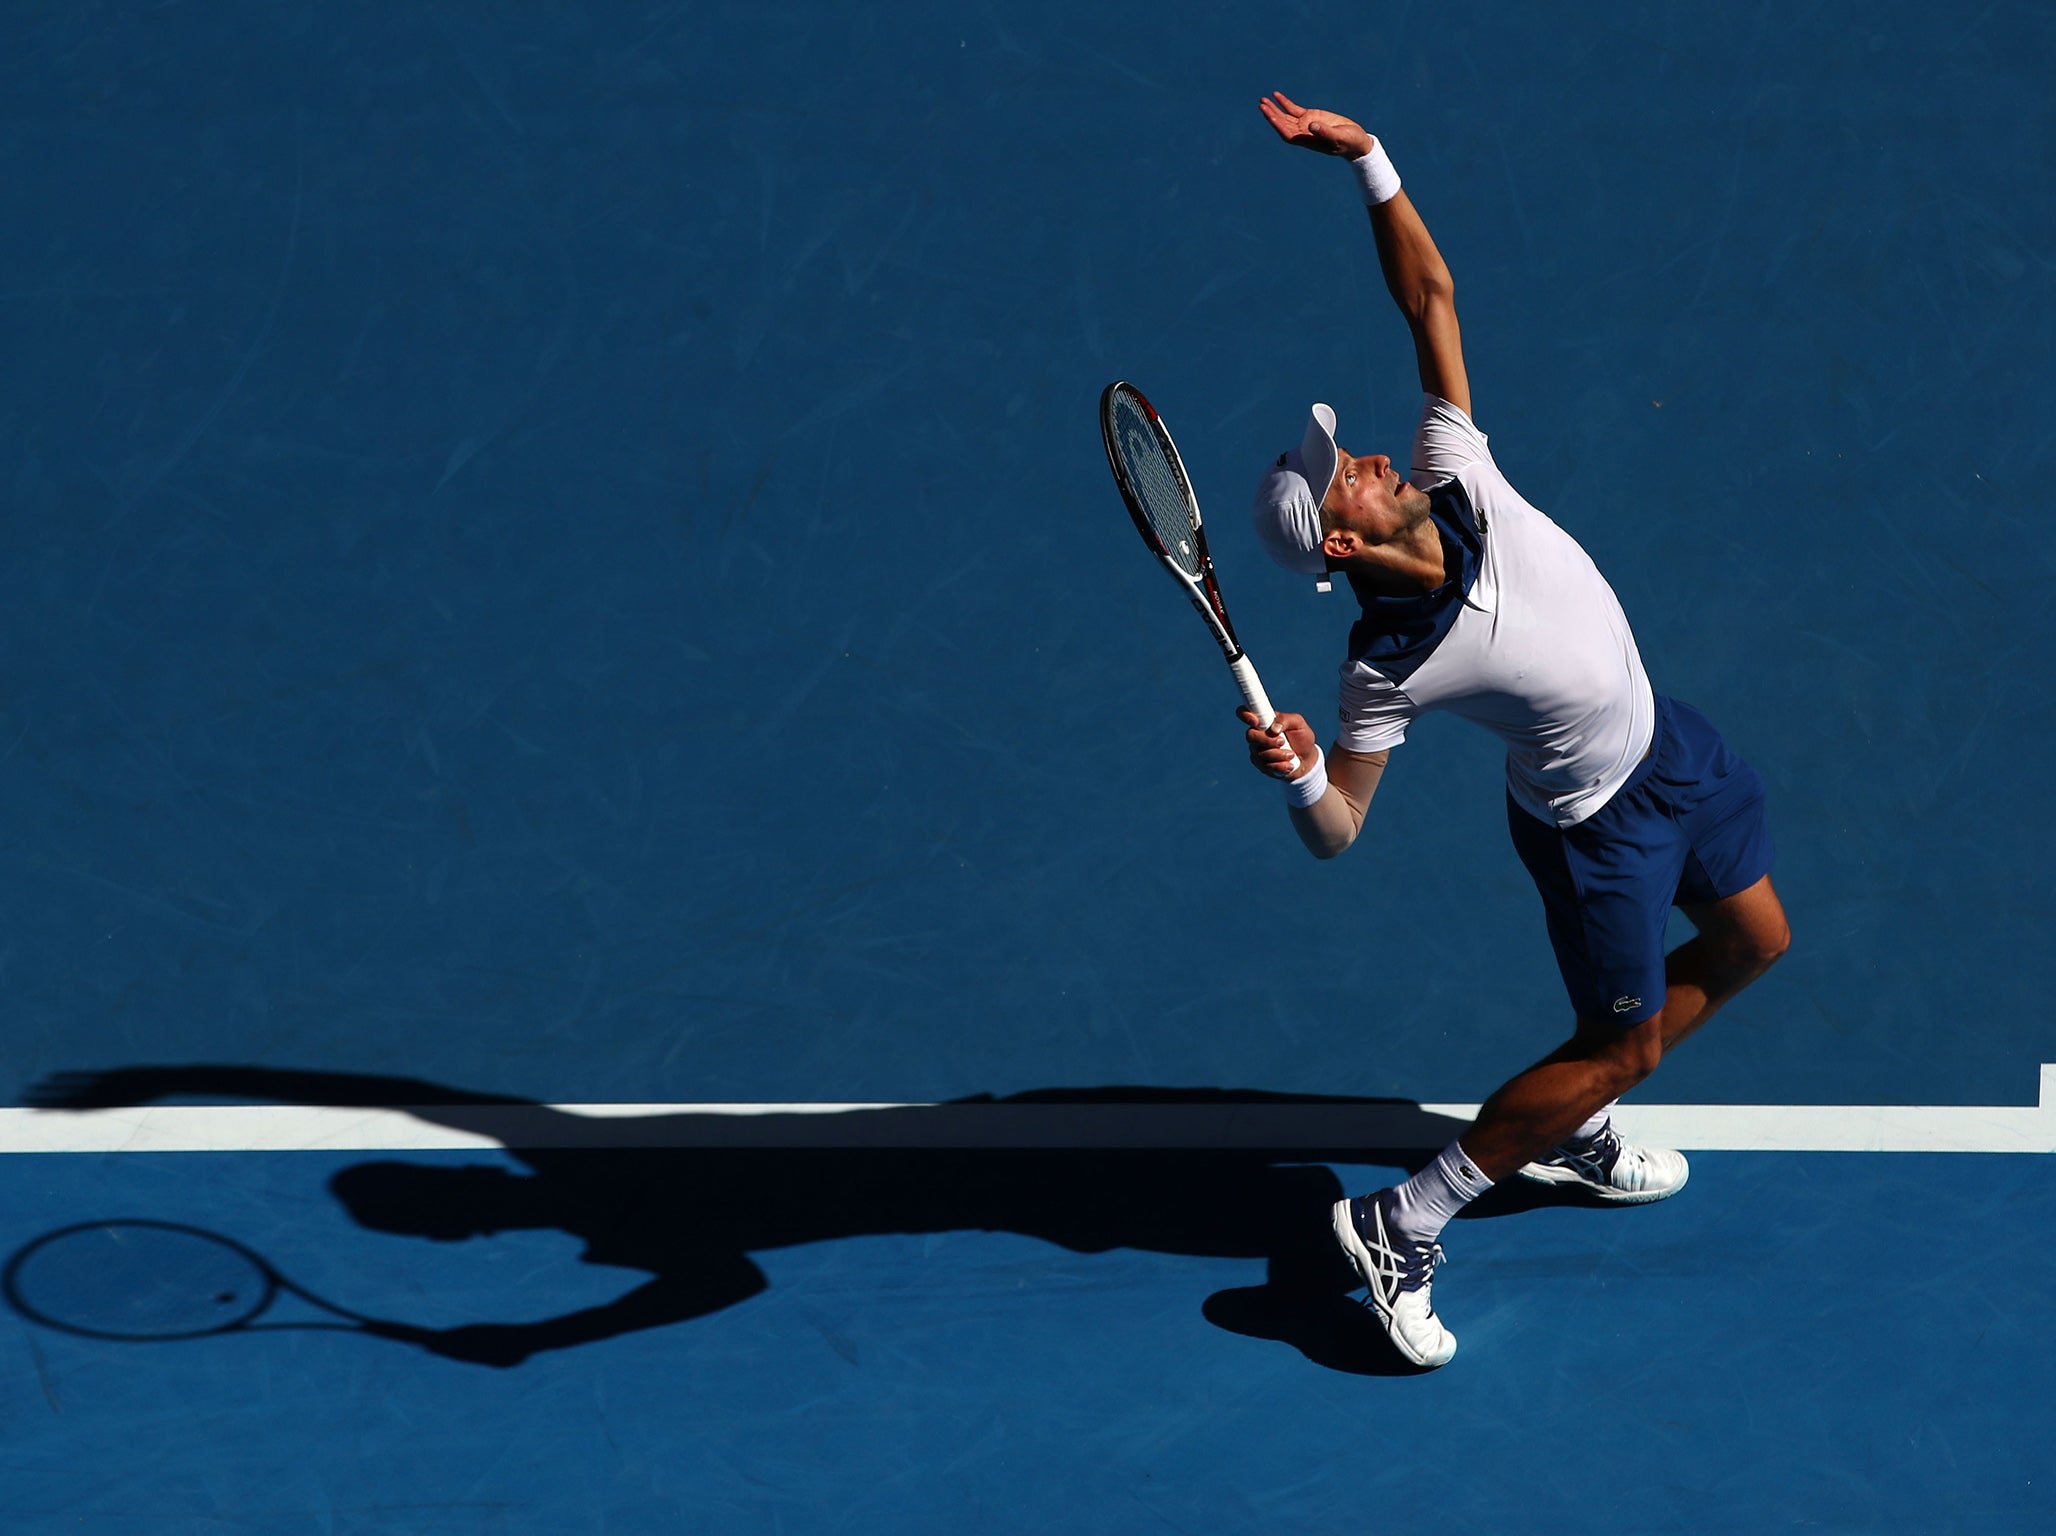 Djokovic demonstrated a shortened service action